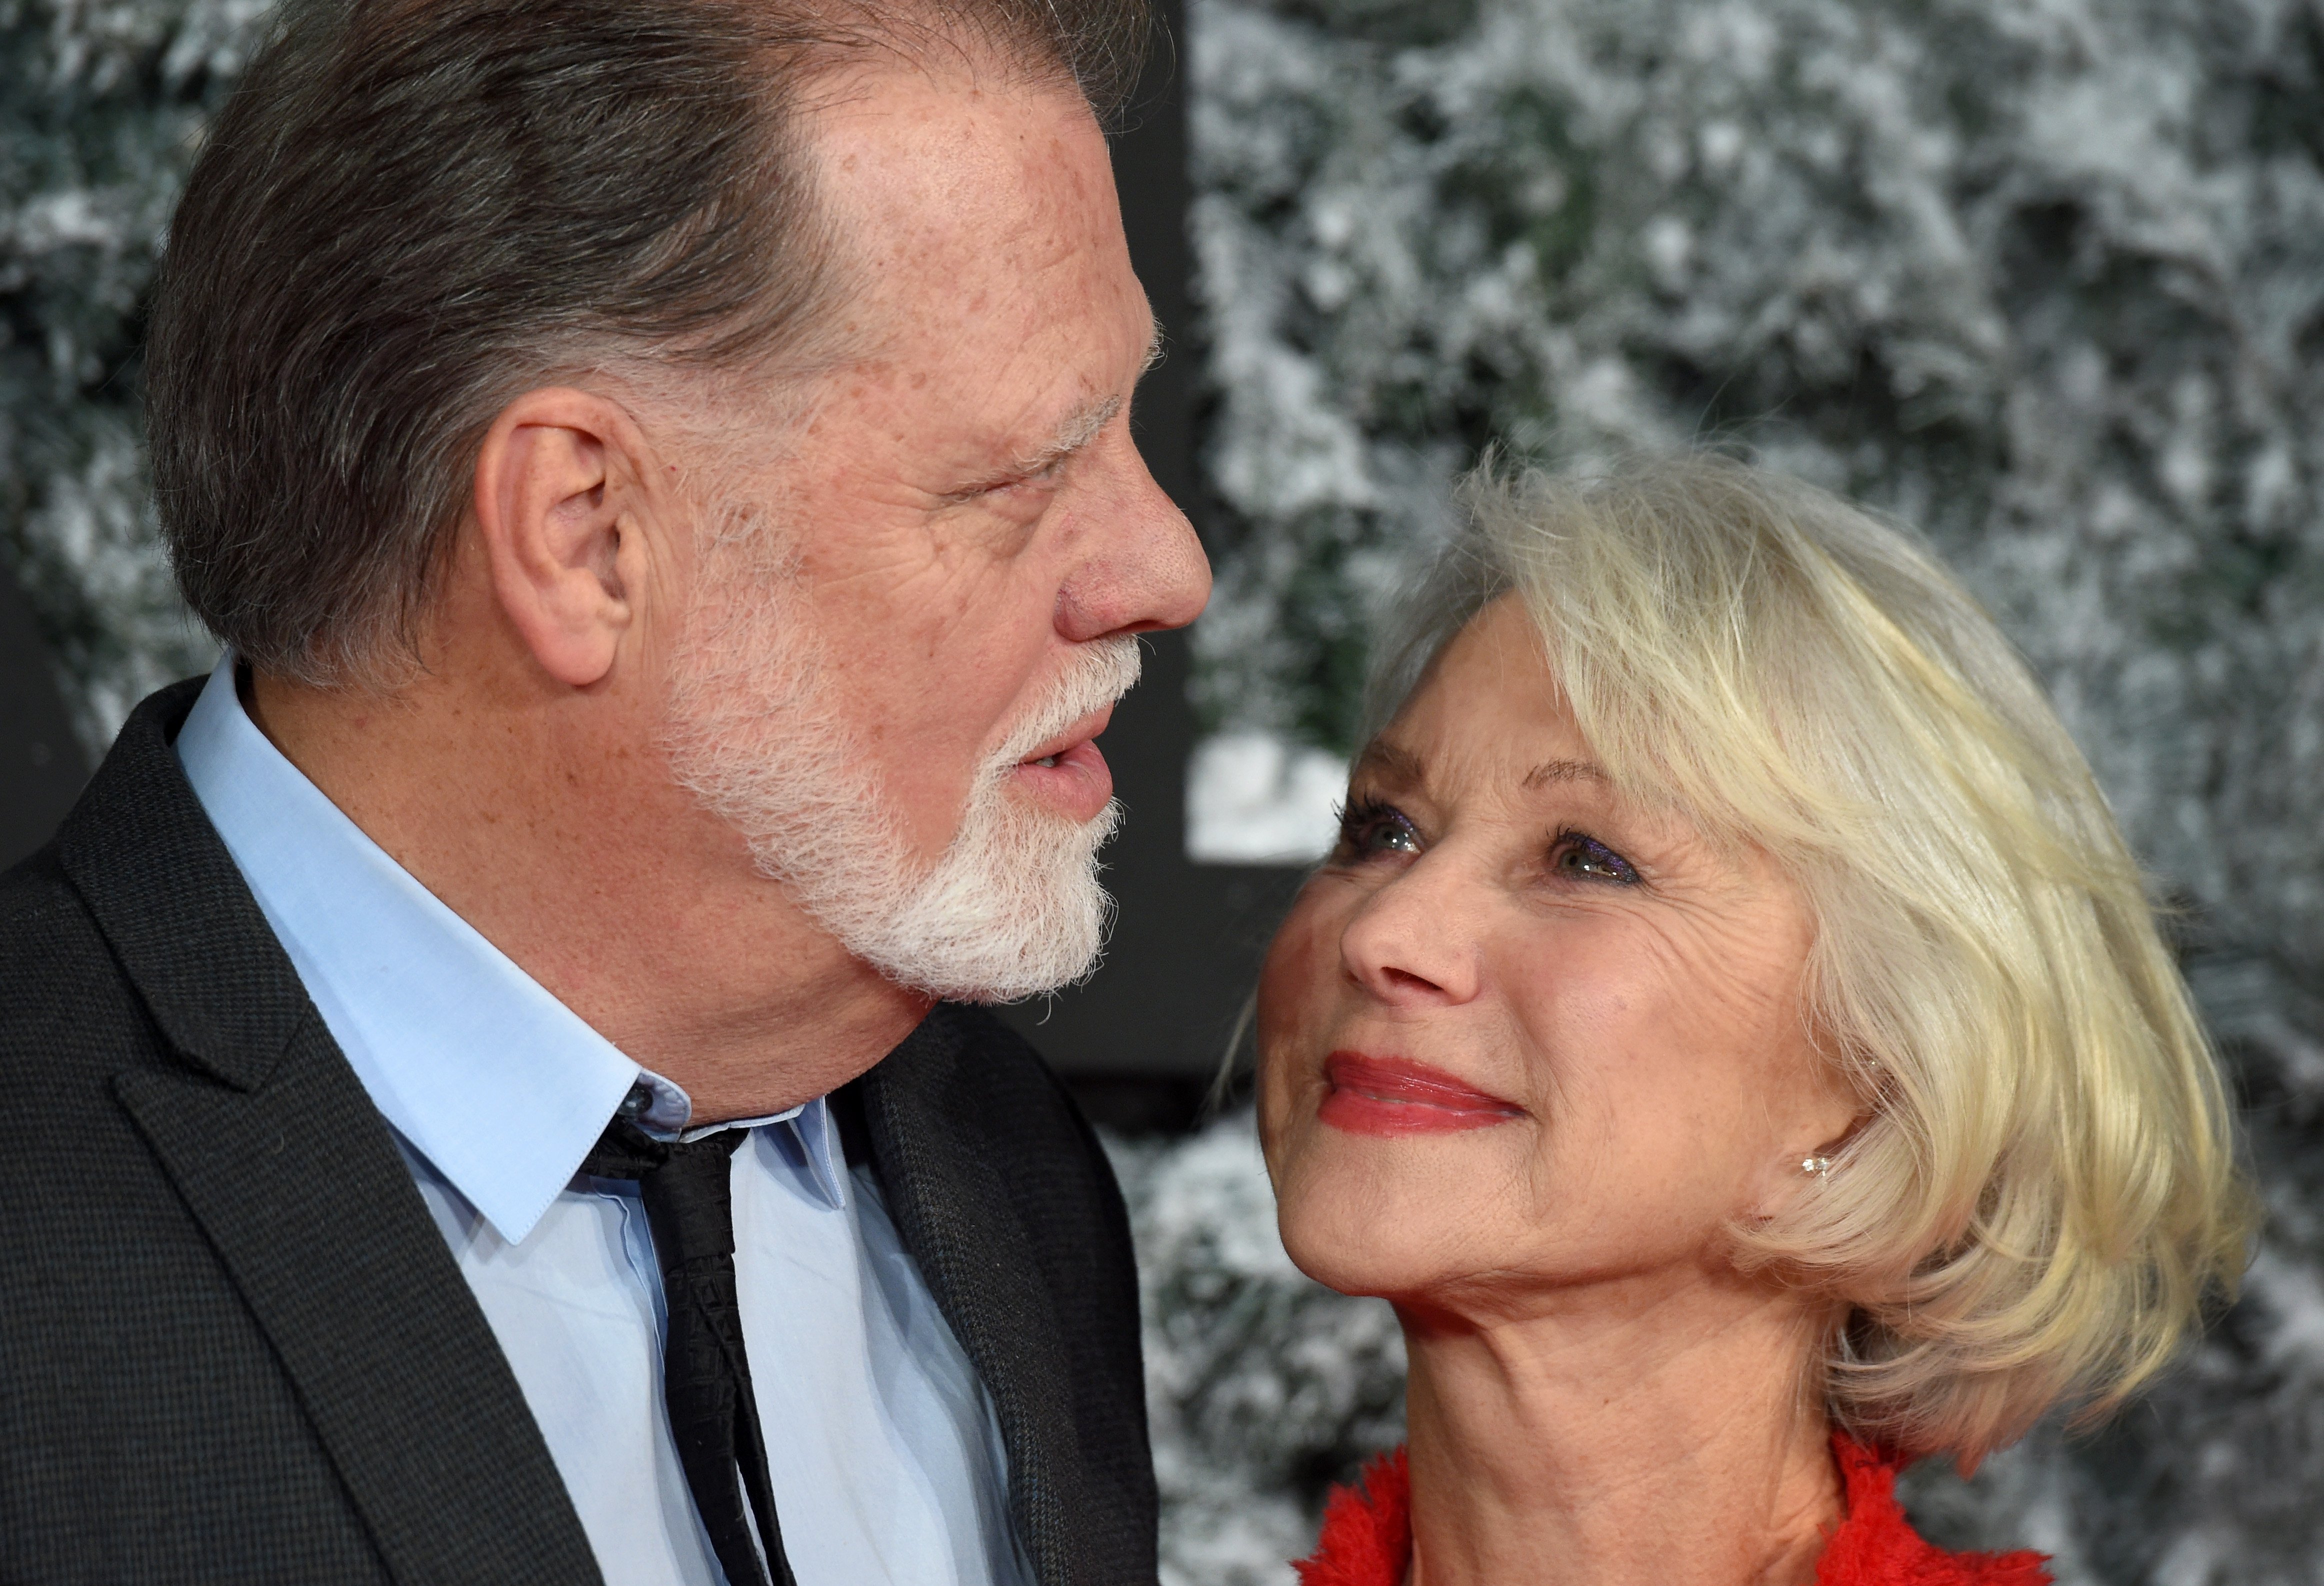 Helen Mirren and Taylor Hackford at the European premiere of "Collateral Beauty" on December 15, 2016, in London, England. | Source: Anthony Harvey/Getty Images